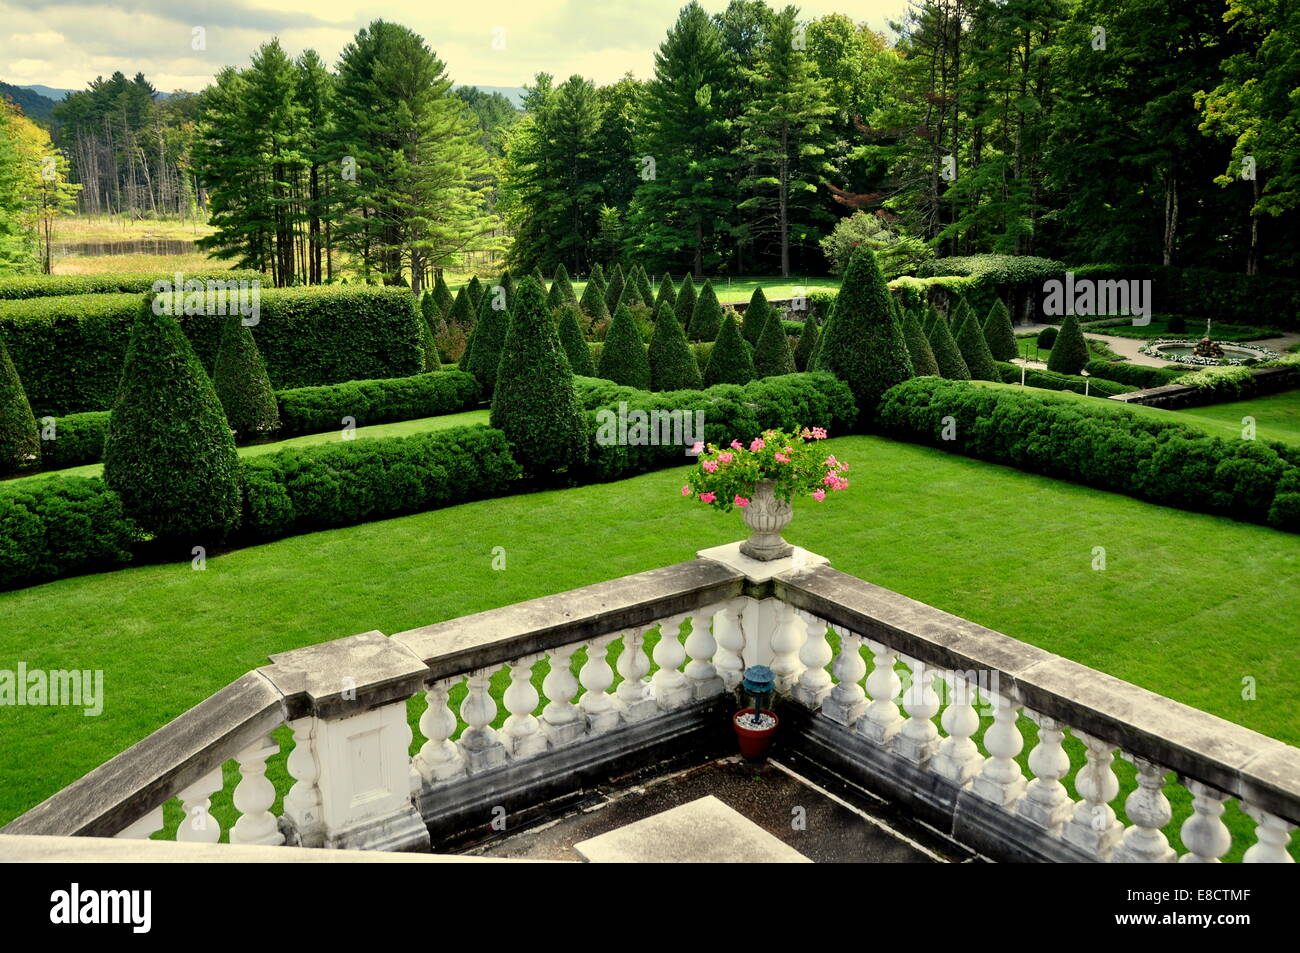 Lenox, Massachusetts: Trees clipped into cone shapes on the formal terraced lawns at The Mount, Edith Wharton's Summer home Stock Photo